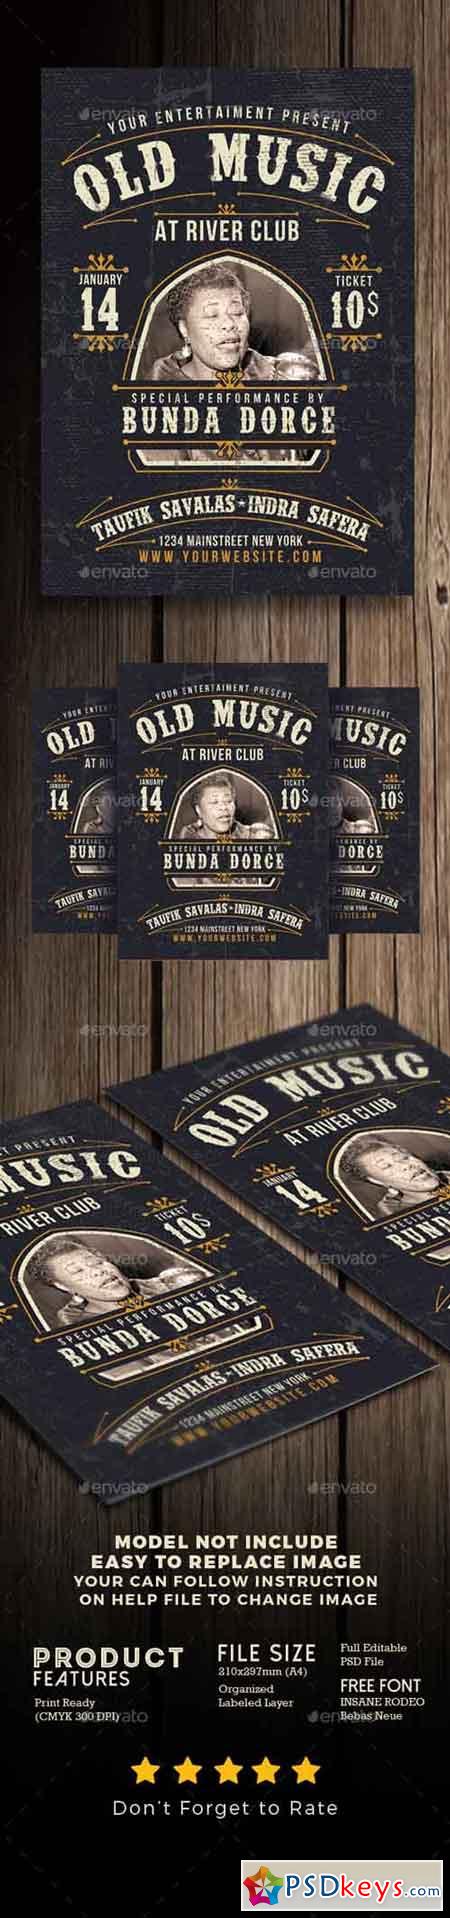 Old Music Flyer Poster 19238714